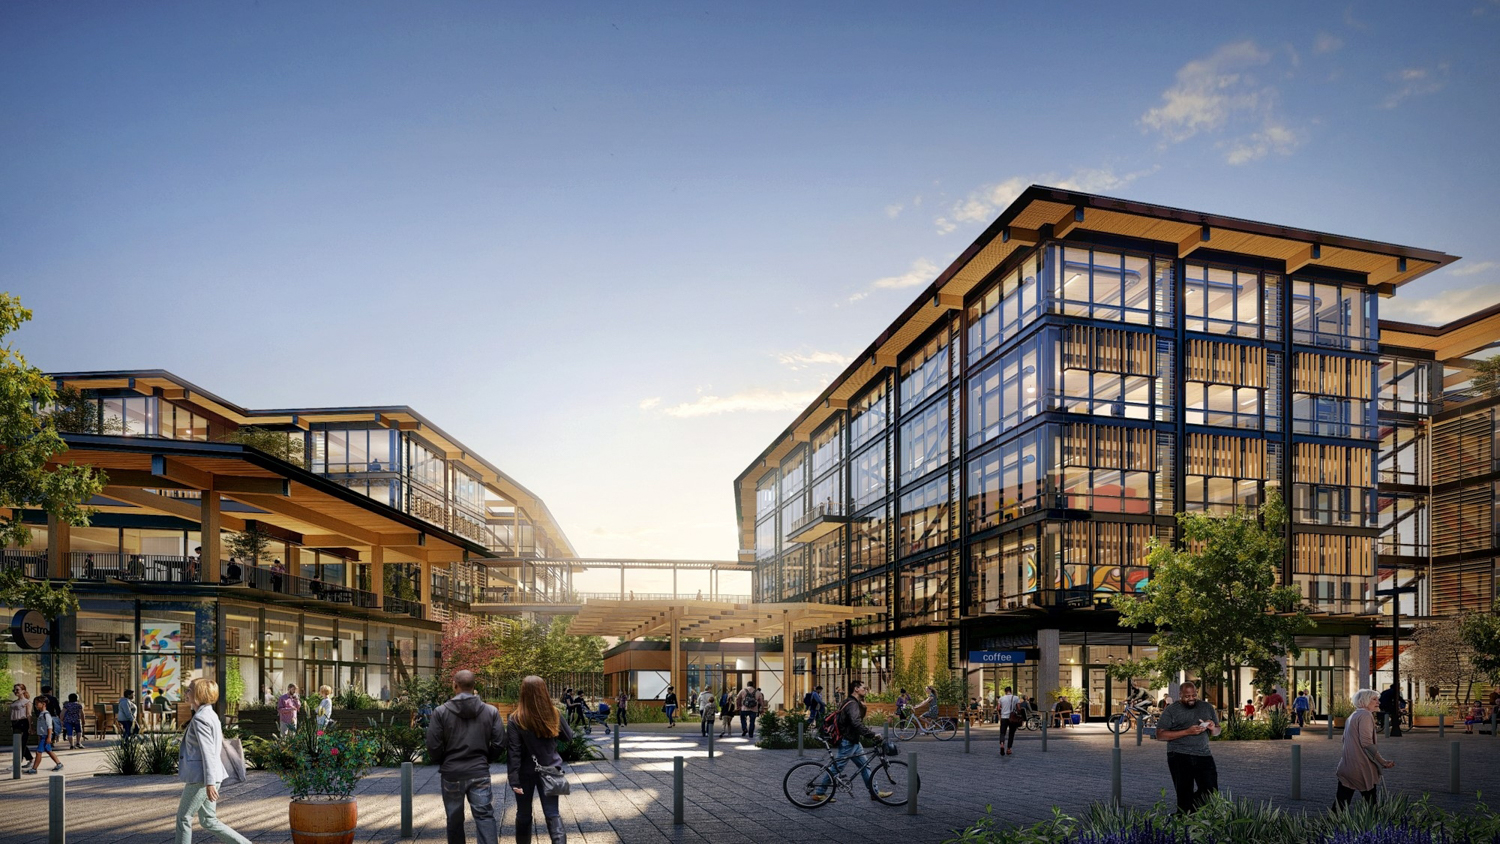 Facebook and Signature Release New Renderings of Willow Village, Menlo